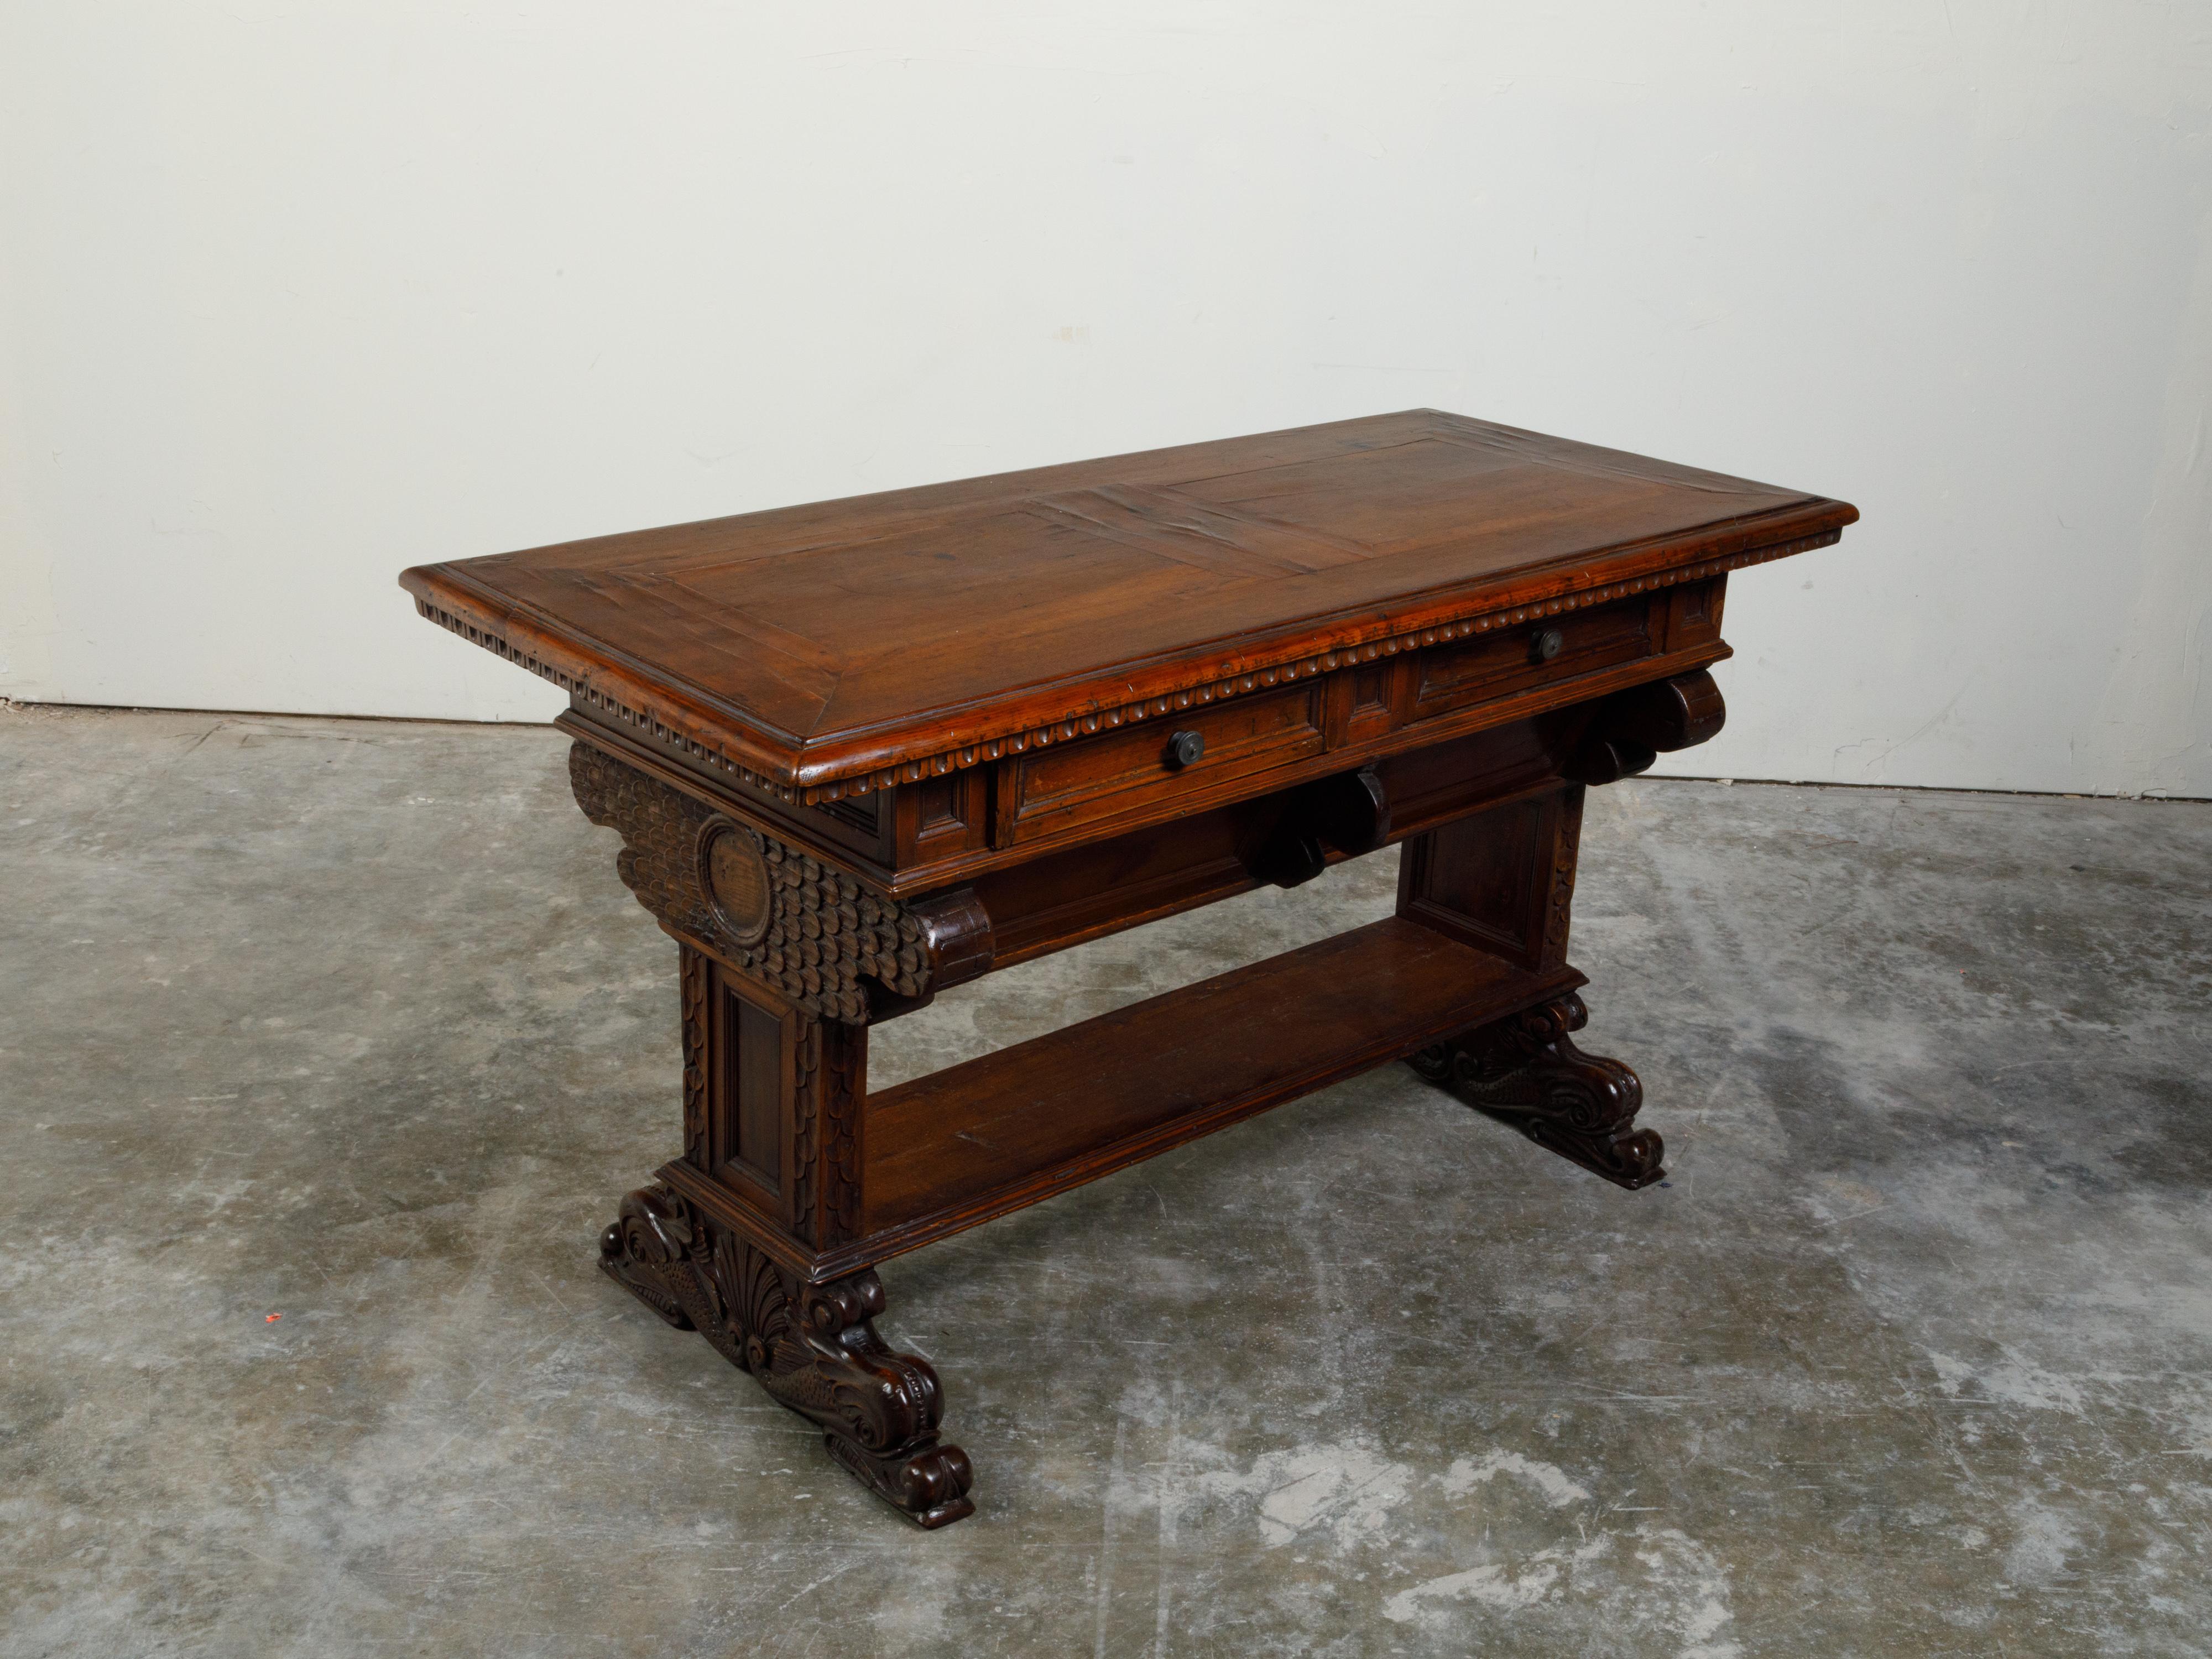 Italian 1800s Walnut Trestle Base Table with Two Drawers and Carved Motifs In Good Condition For Sale In Atlanta, GA